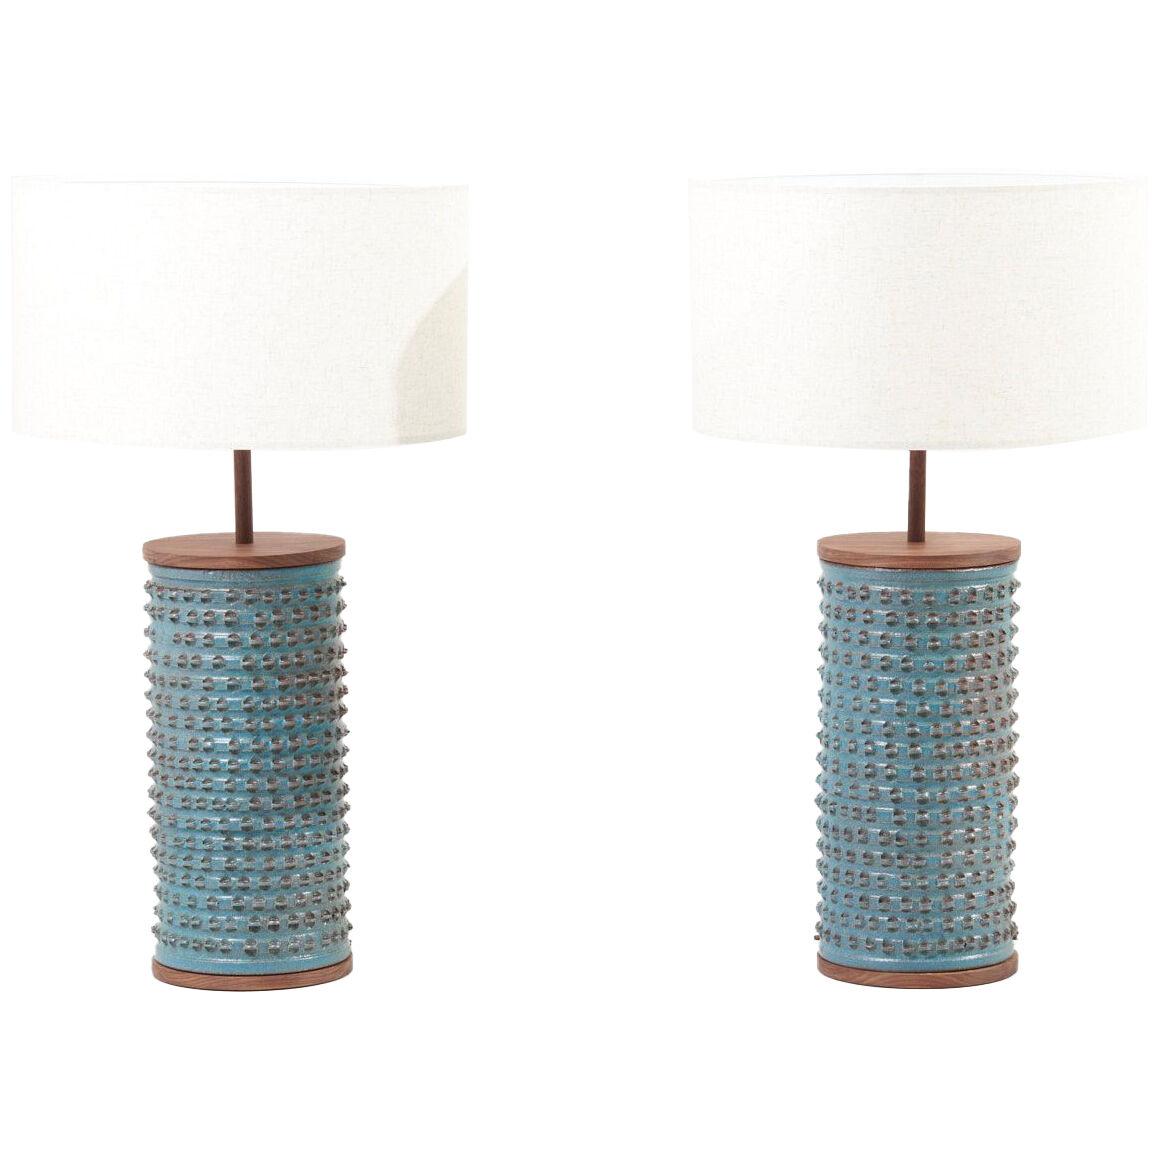 Pair of Brent Bennet Ceramic Table Lamps, USA - 2021